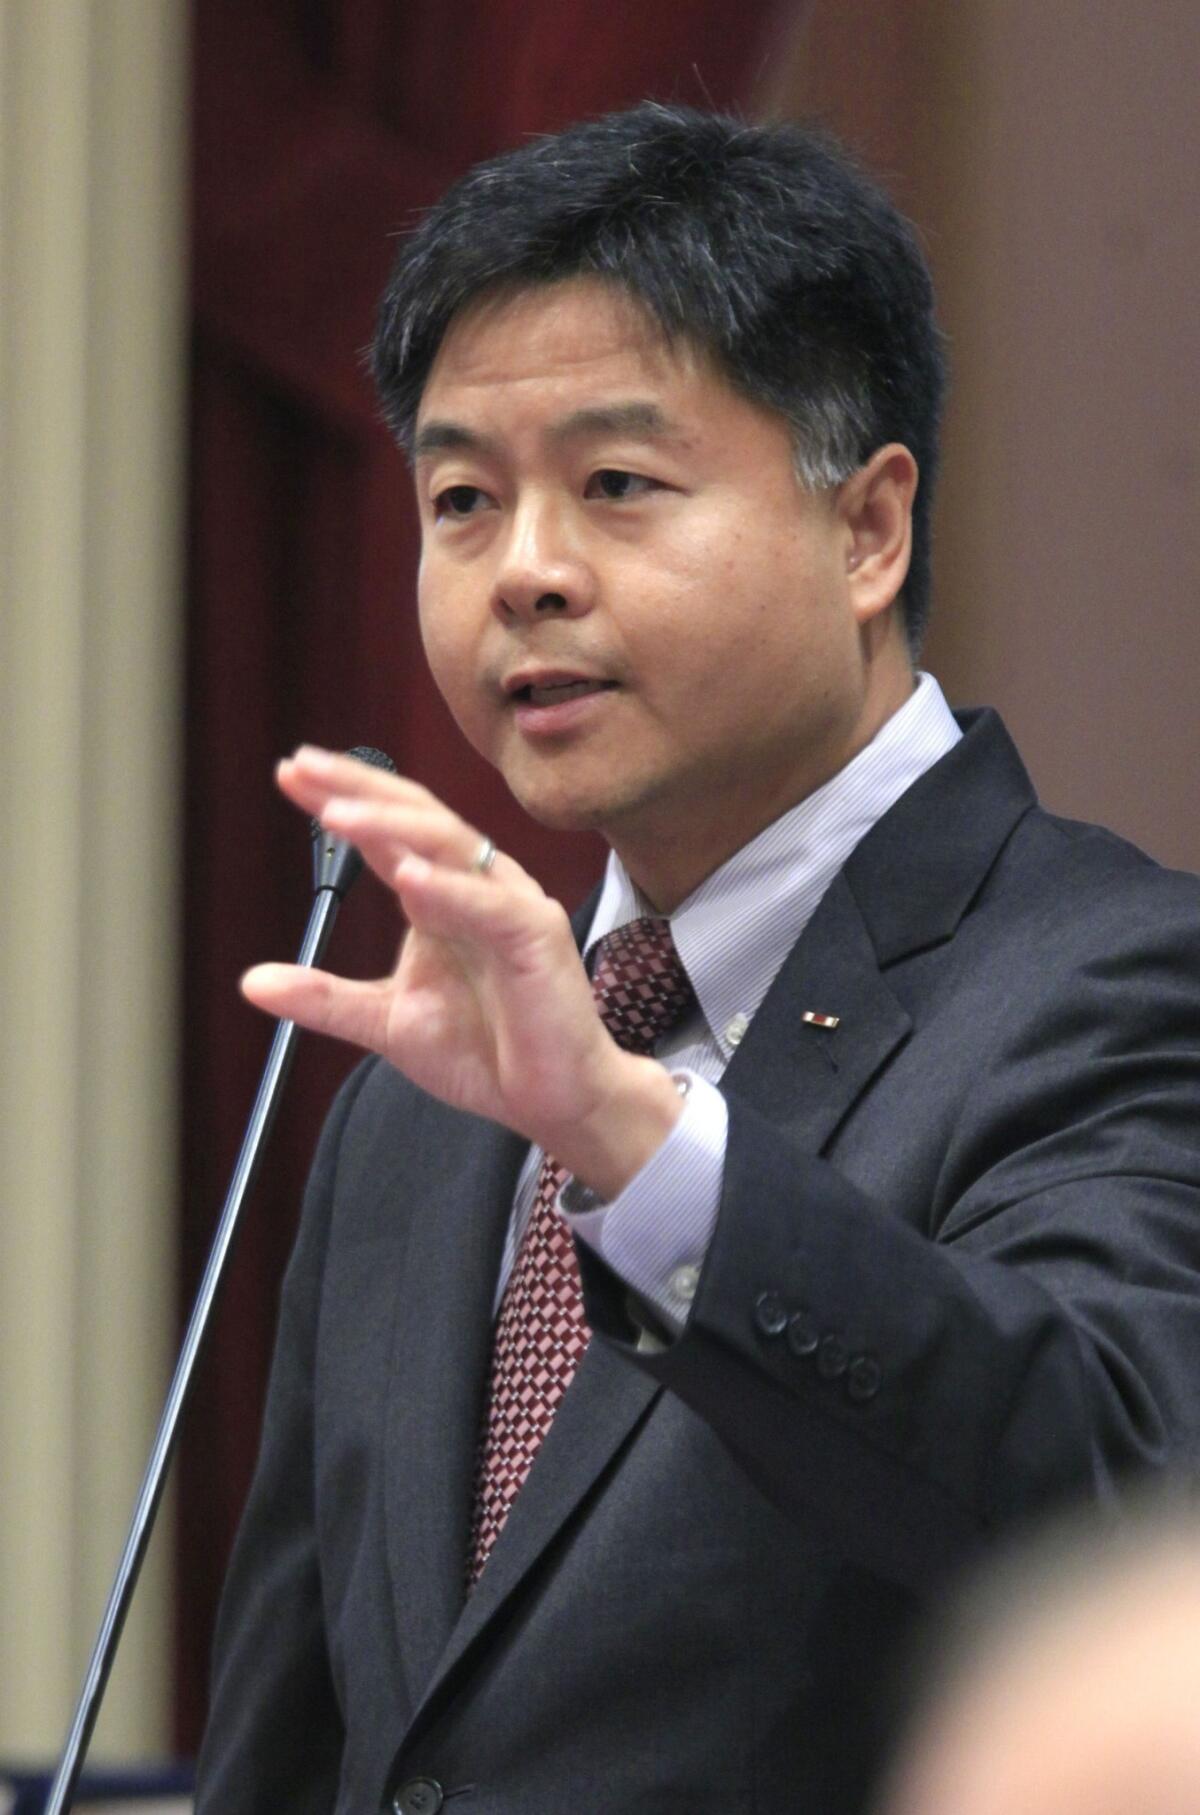 State Sen. Ted W. Lieu (D-Torrance), who wrote the law banning conversion therapy for gays, said Thursday's ruling demonstrated that the Constitution has never permitted "psychological child abuse." He added: "Now the law has caught up to the truth: Sexual orientation is not a mental illness or defect, but rather the beautiful realization of what it means to be human."